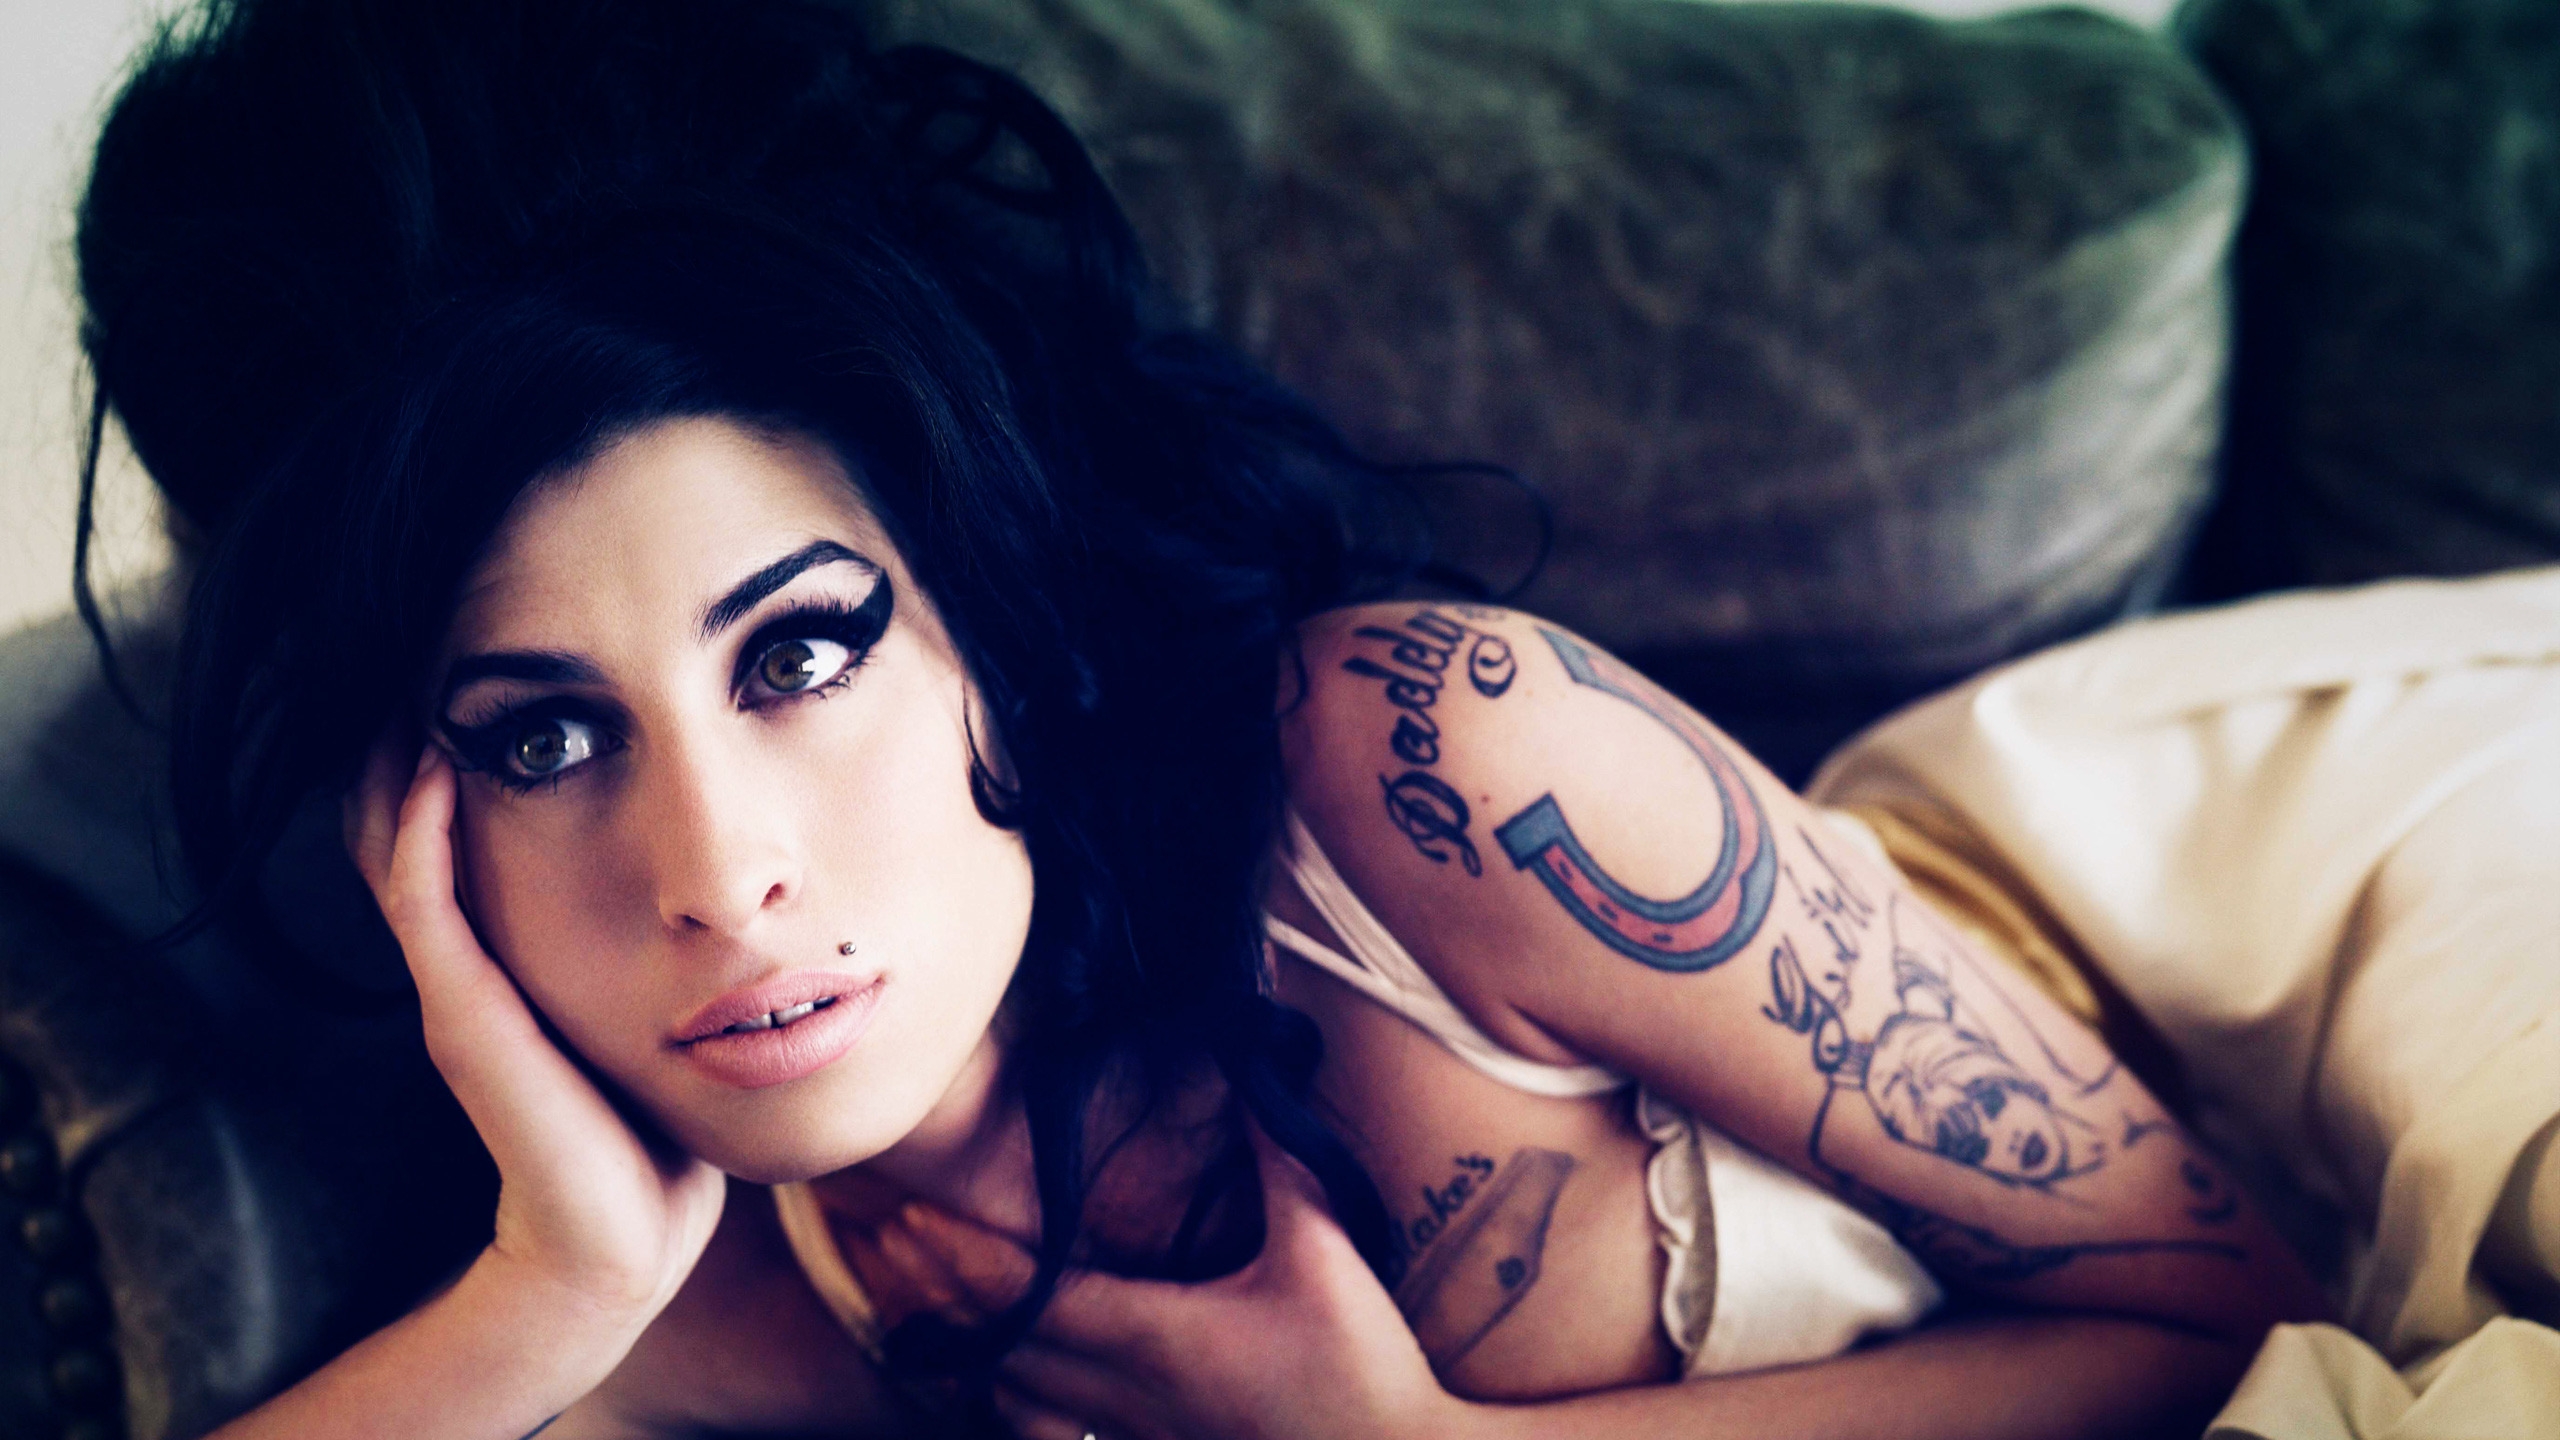 Amy Winehouse for 2560x1440 HDTV resolution